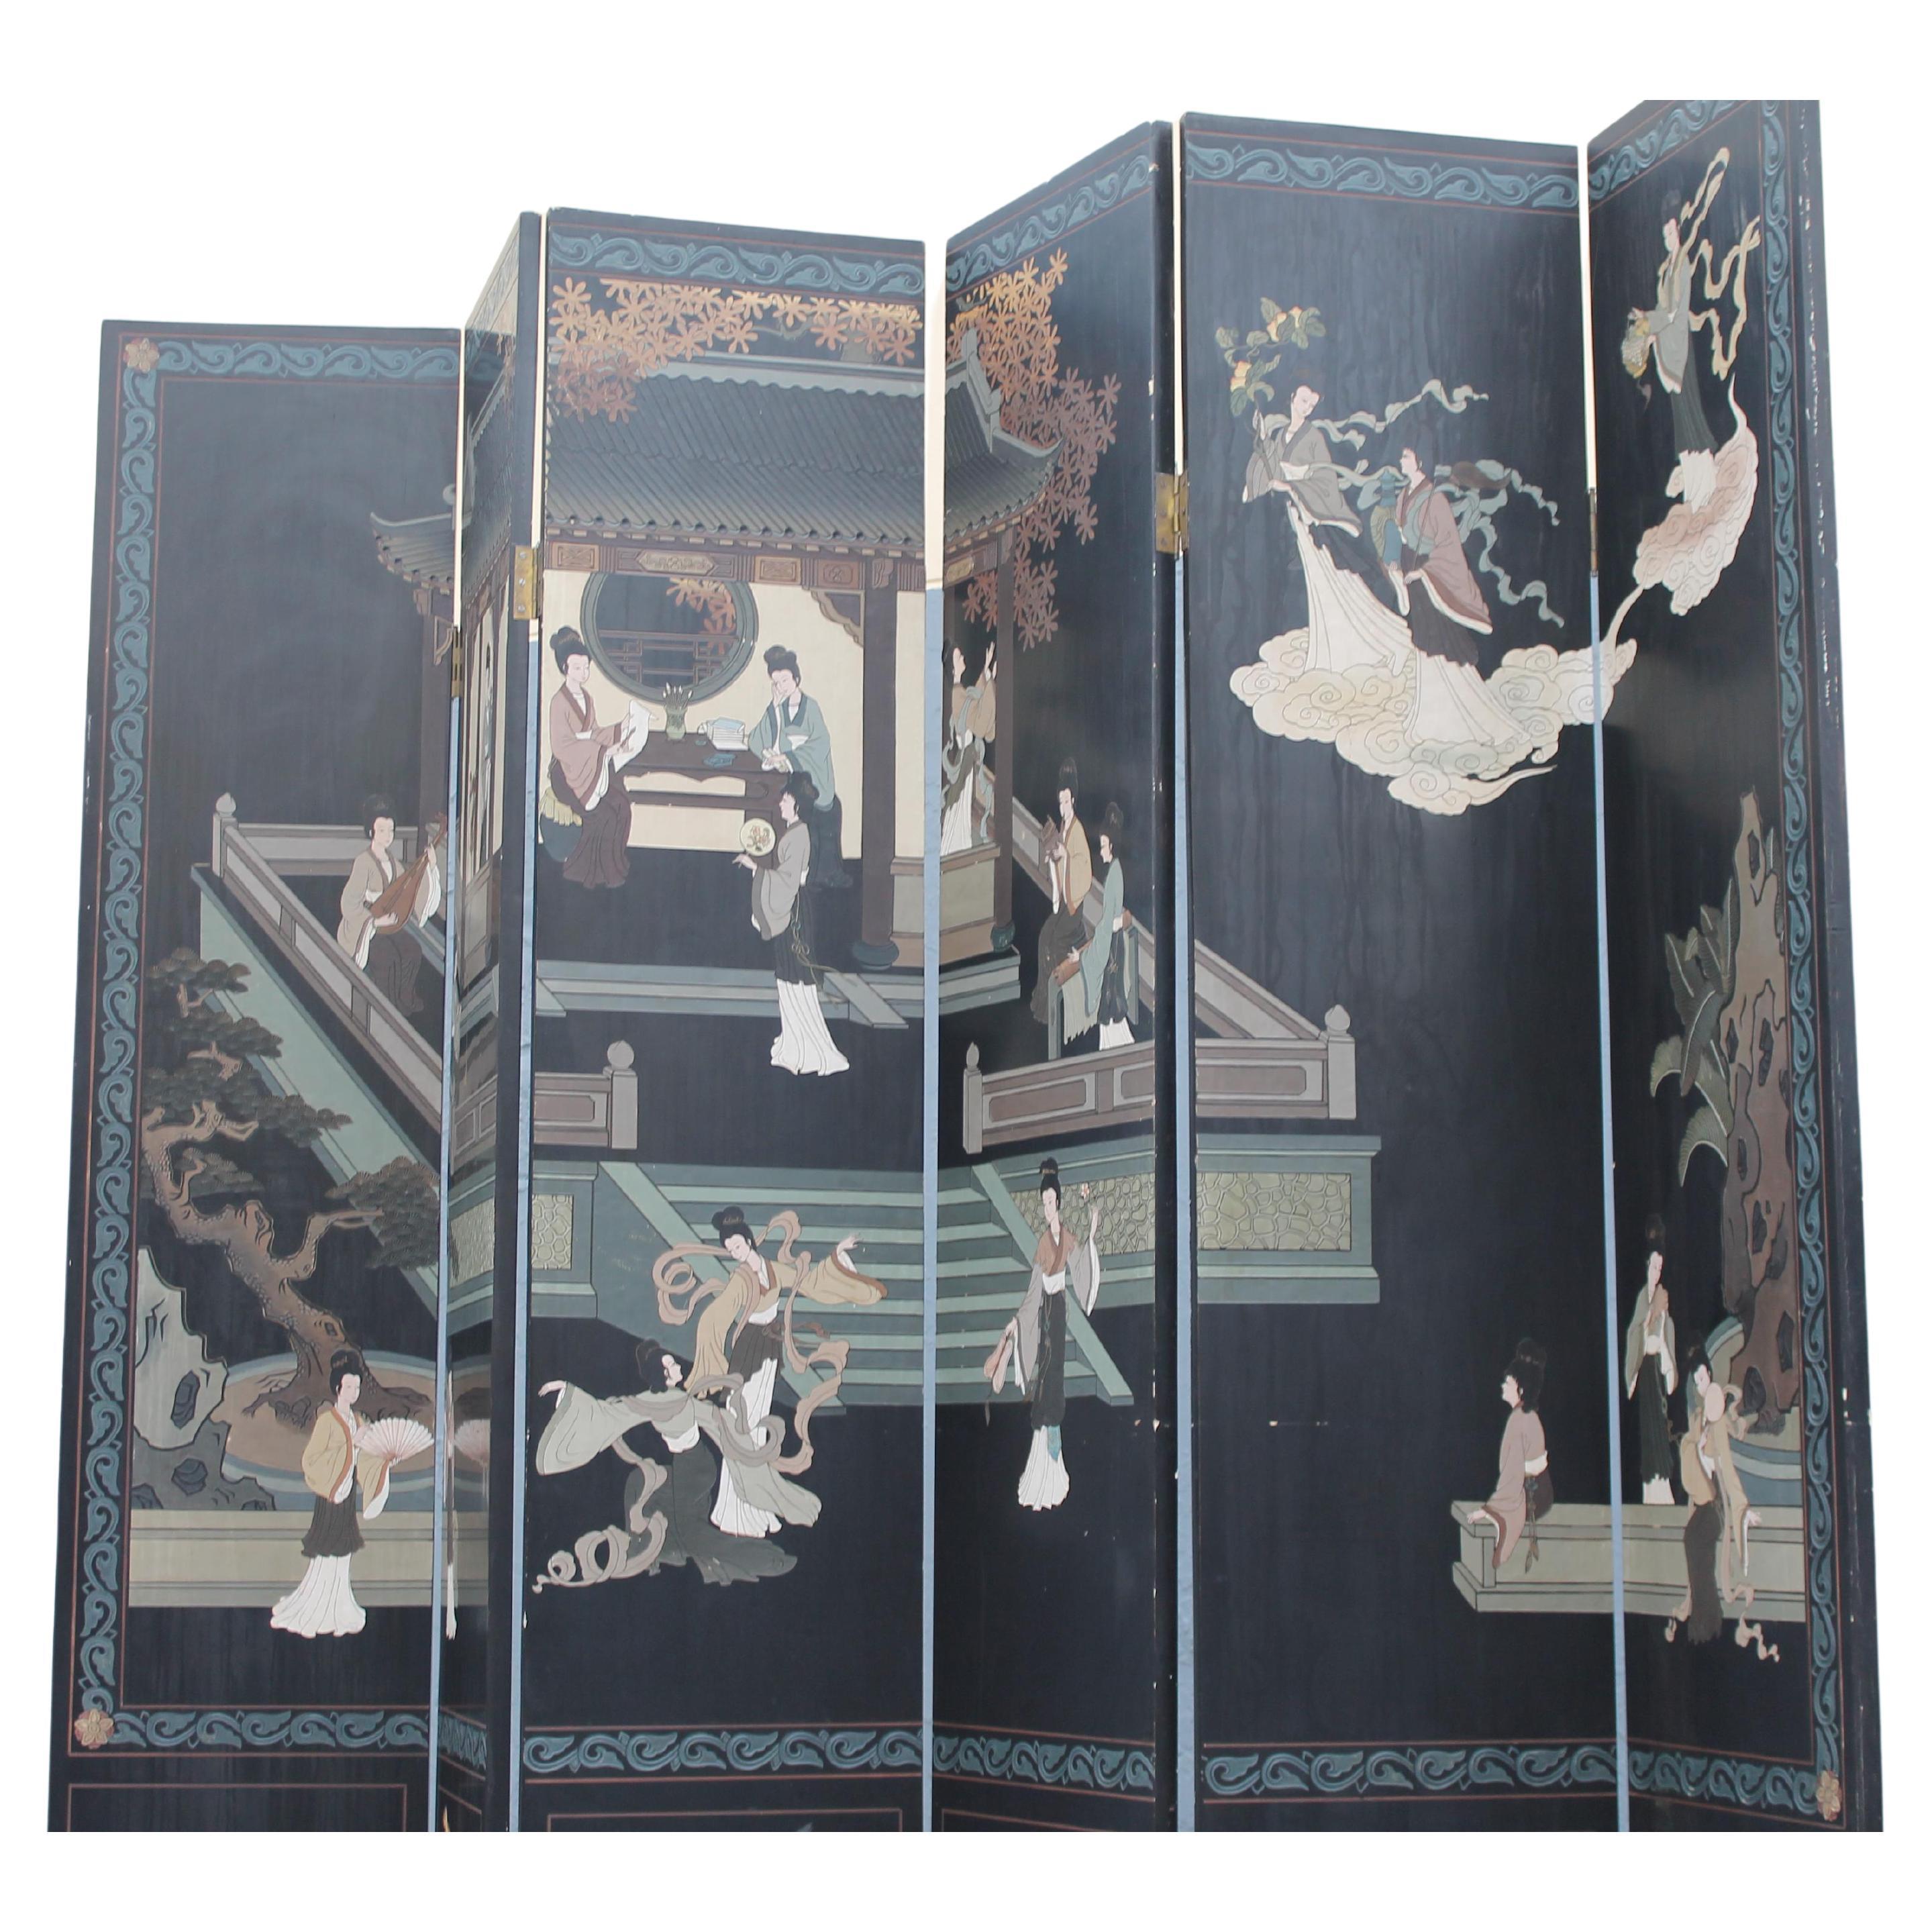 1940's Hollywood Regency Asian Chinoiserie 6 Panelled Room Dividing Screen. Large, hand painted figures, foliage etc. against a black ground. Miami Beach estate acquisition.